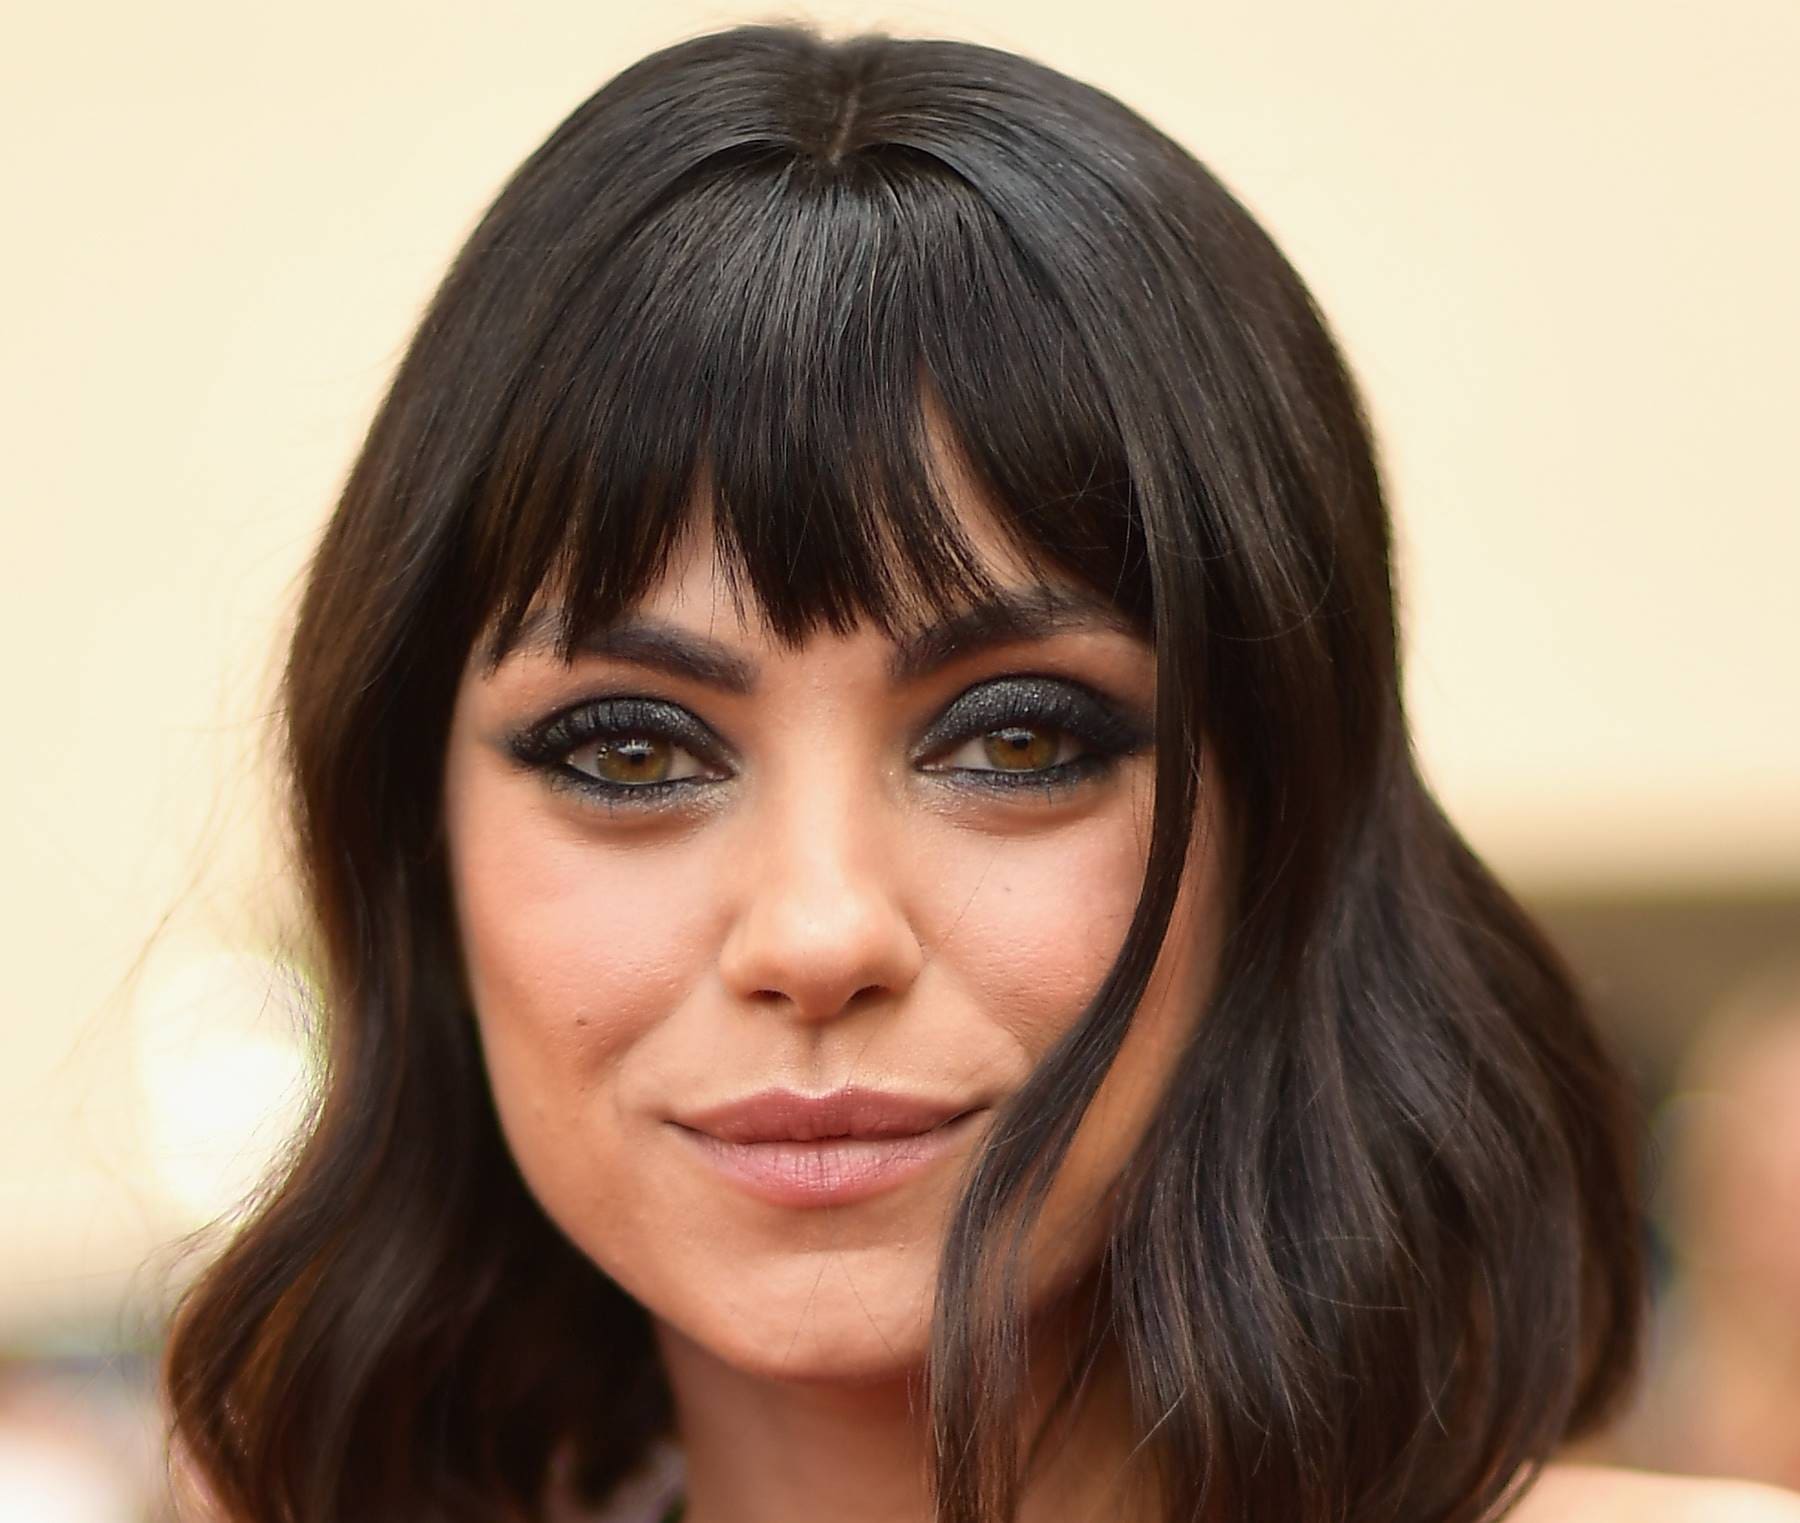 Mila Kunis Spotted In New Photos With Wild Hair Color For This